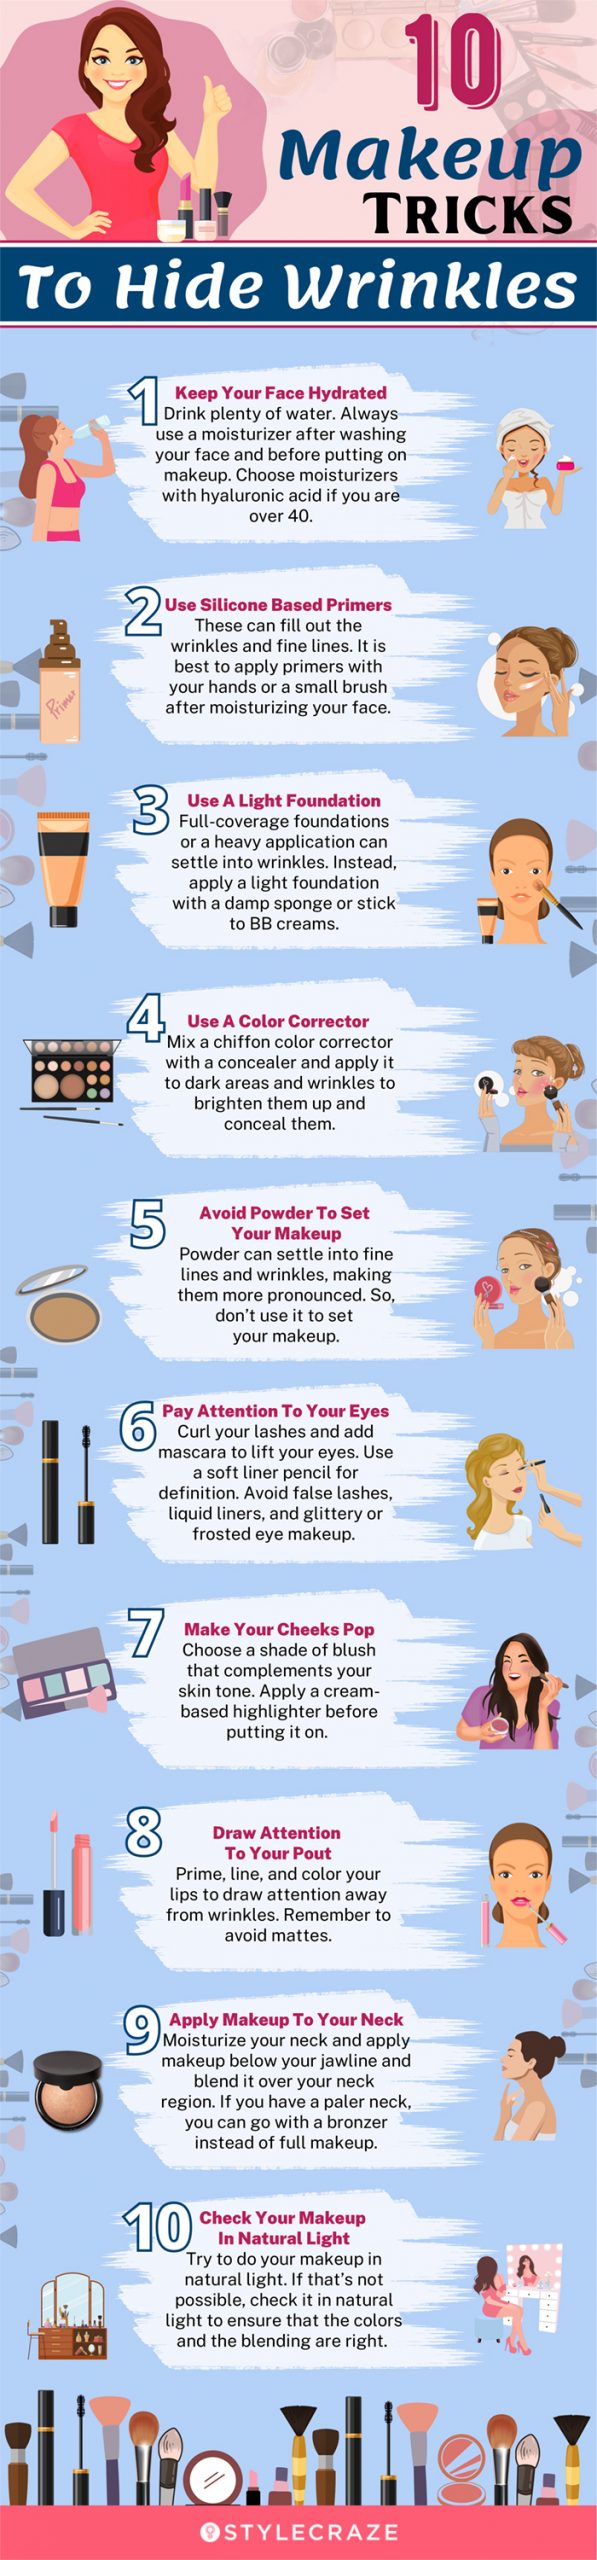 makeup tricks to hide wrinkles (infographic)